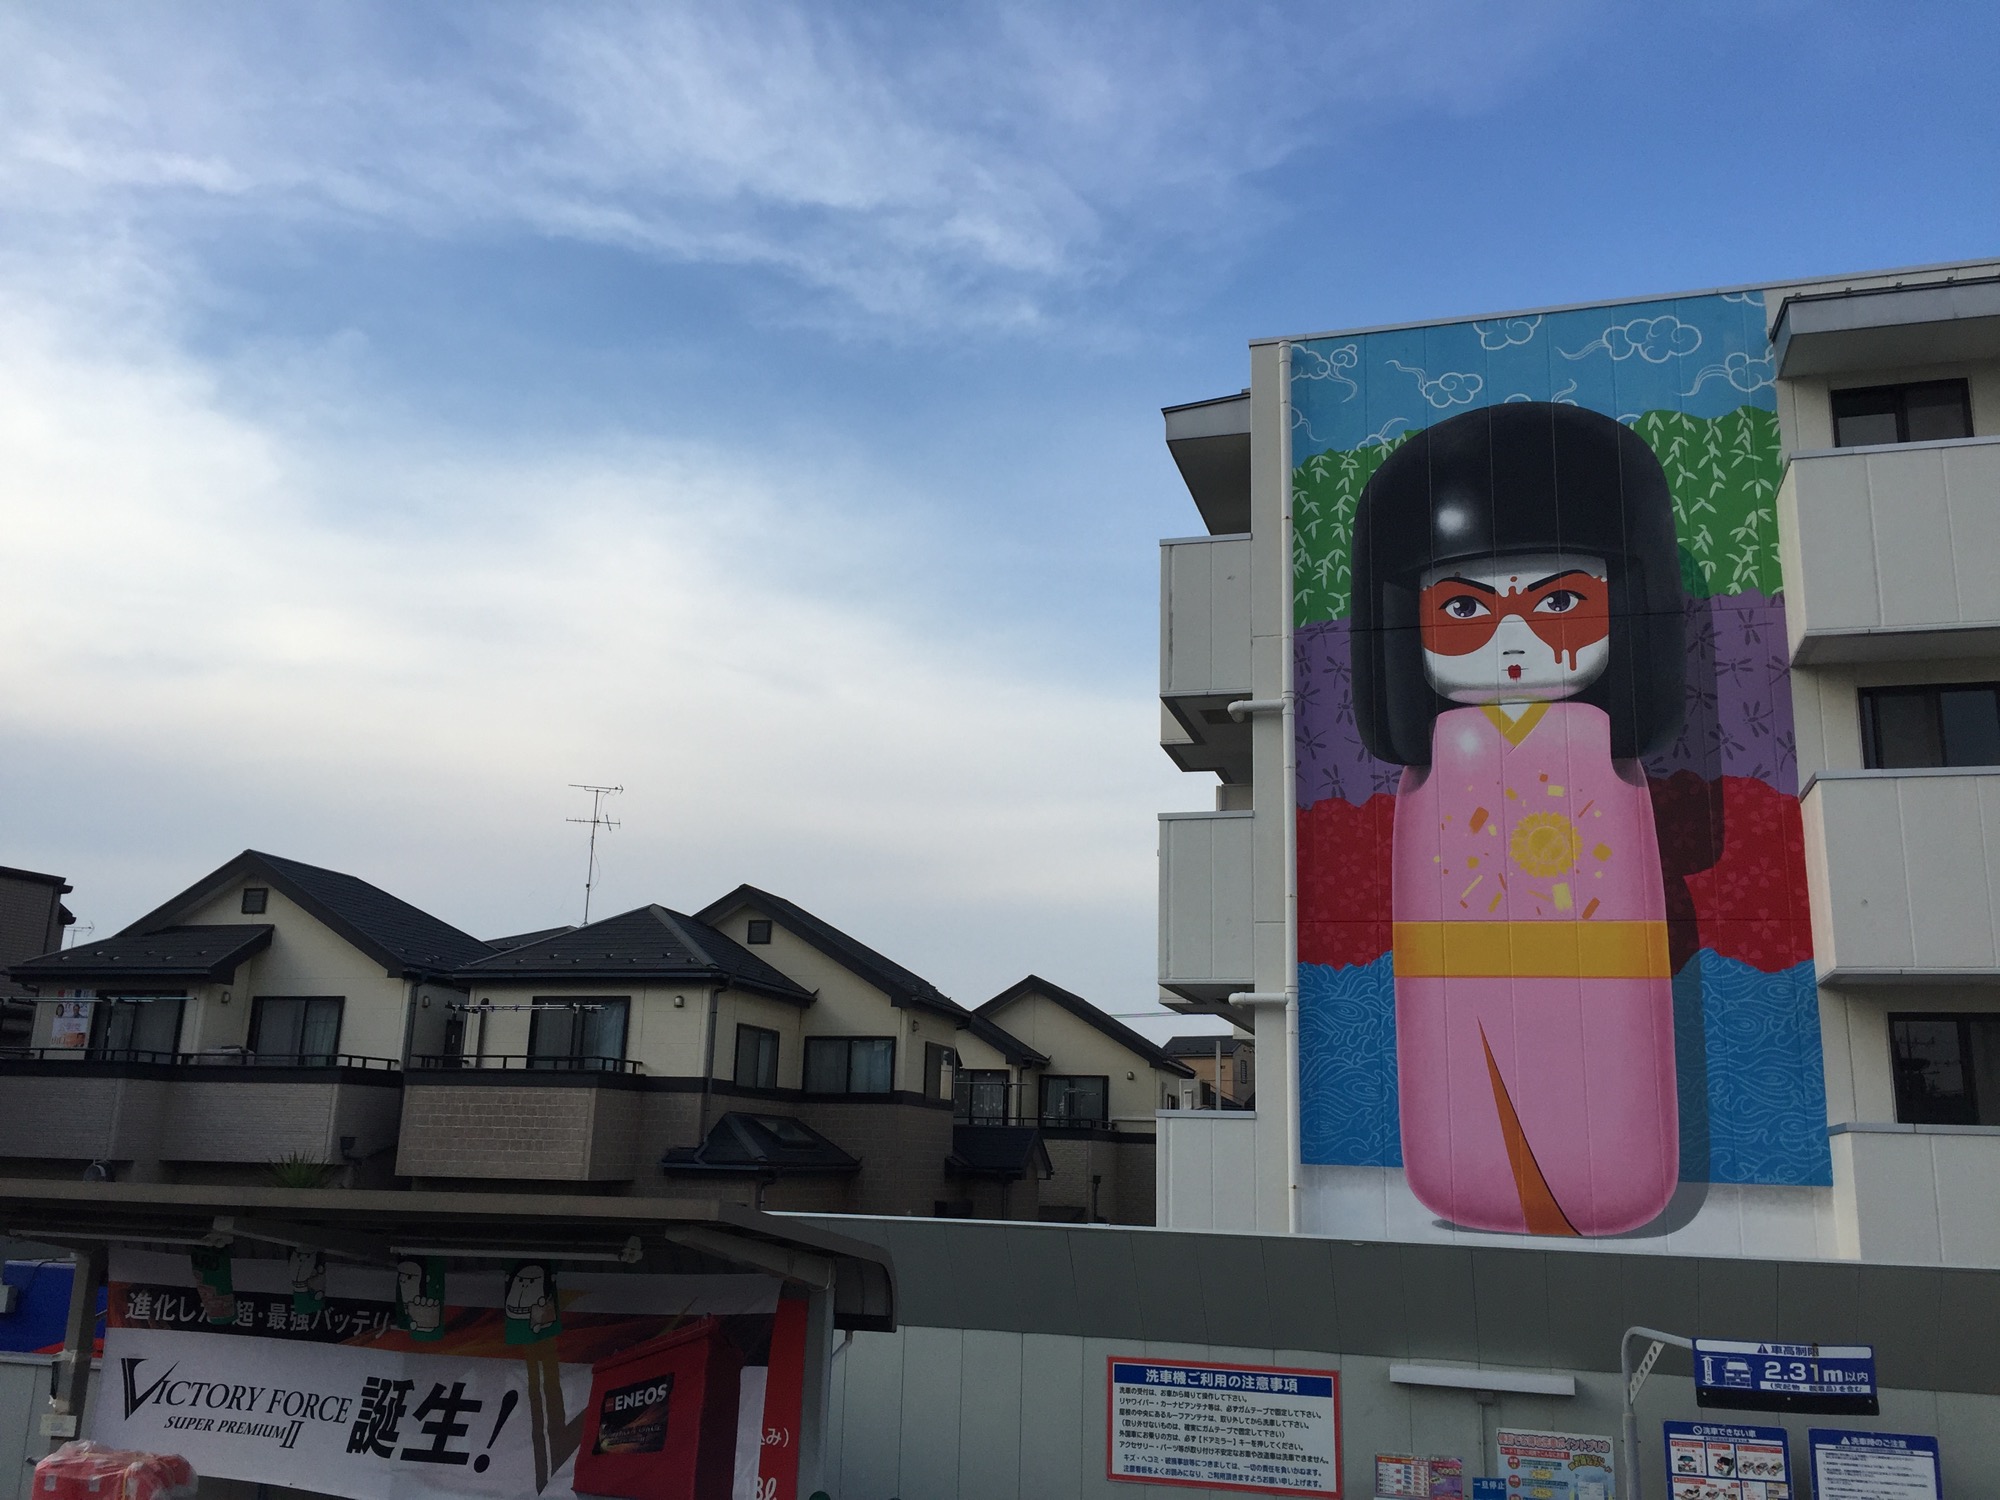 KOKESHI DOLL BRINGS COLOR TO TOKYO DISTRICT - the vandallist (1)